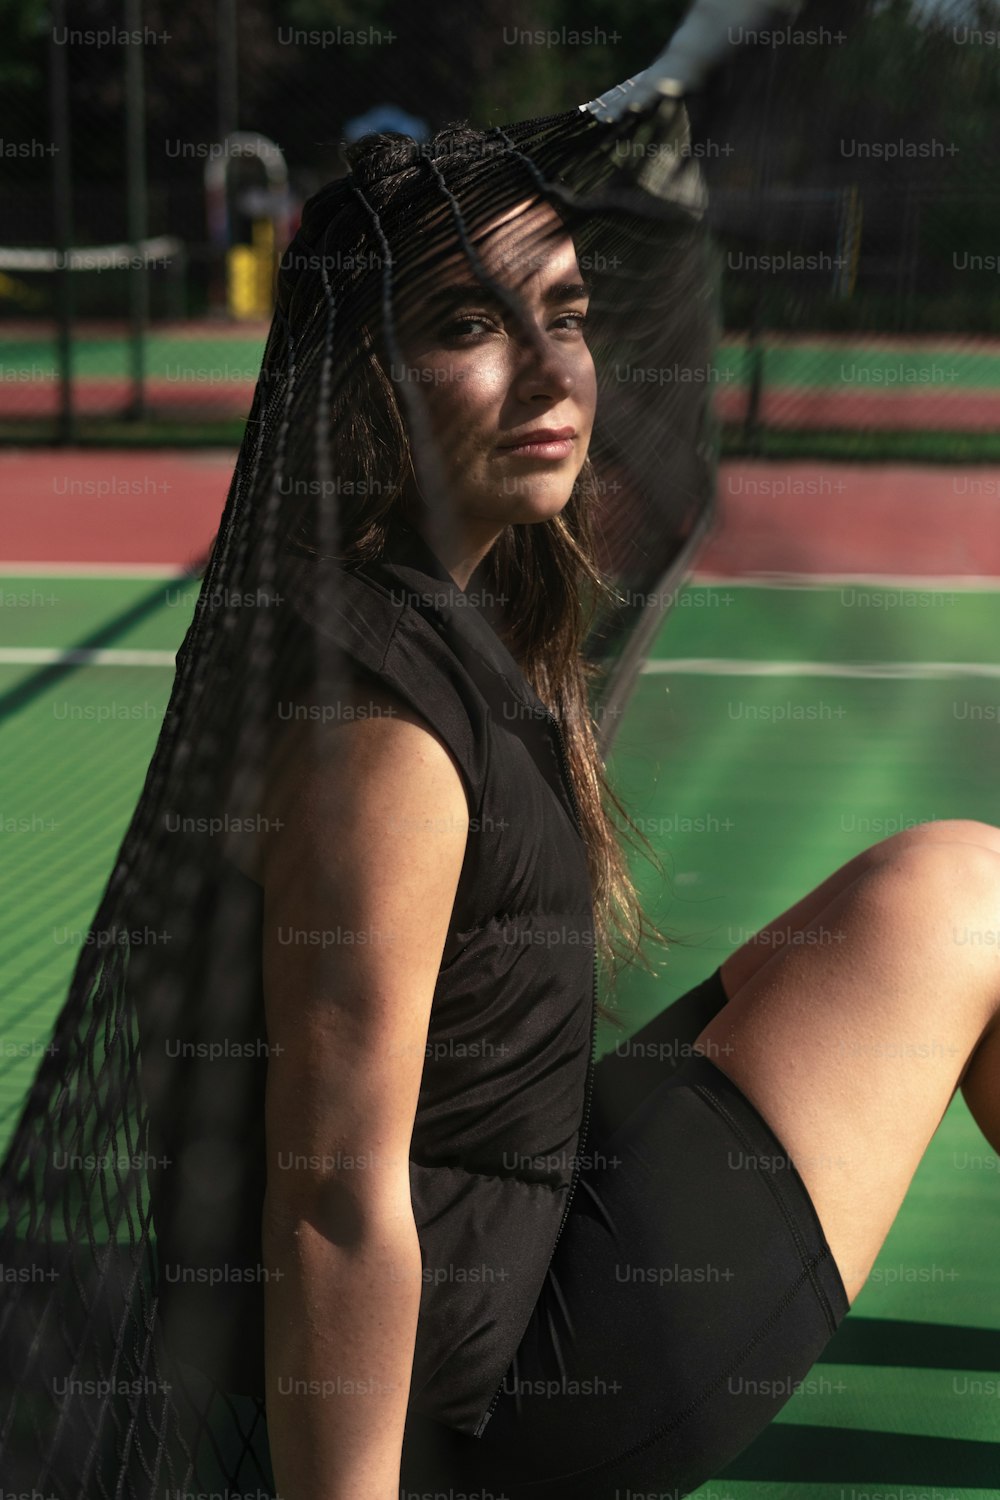 a woman sitting on a tennis court holding a racket